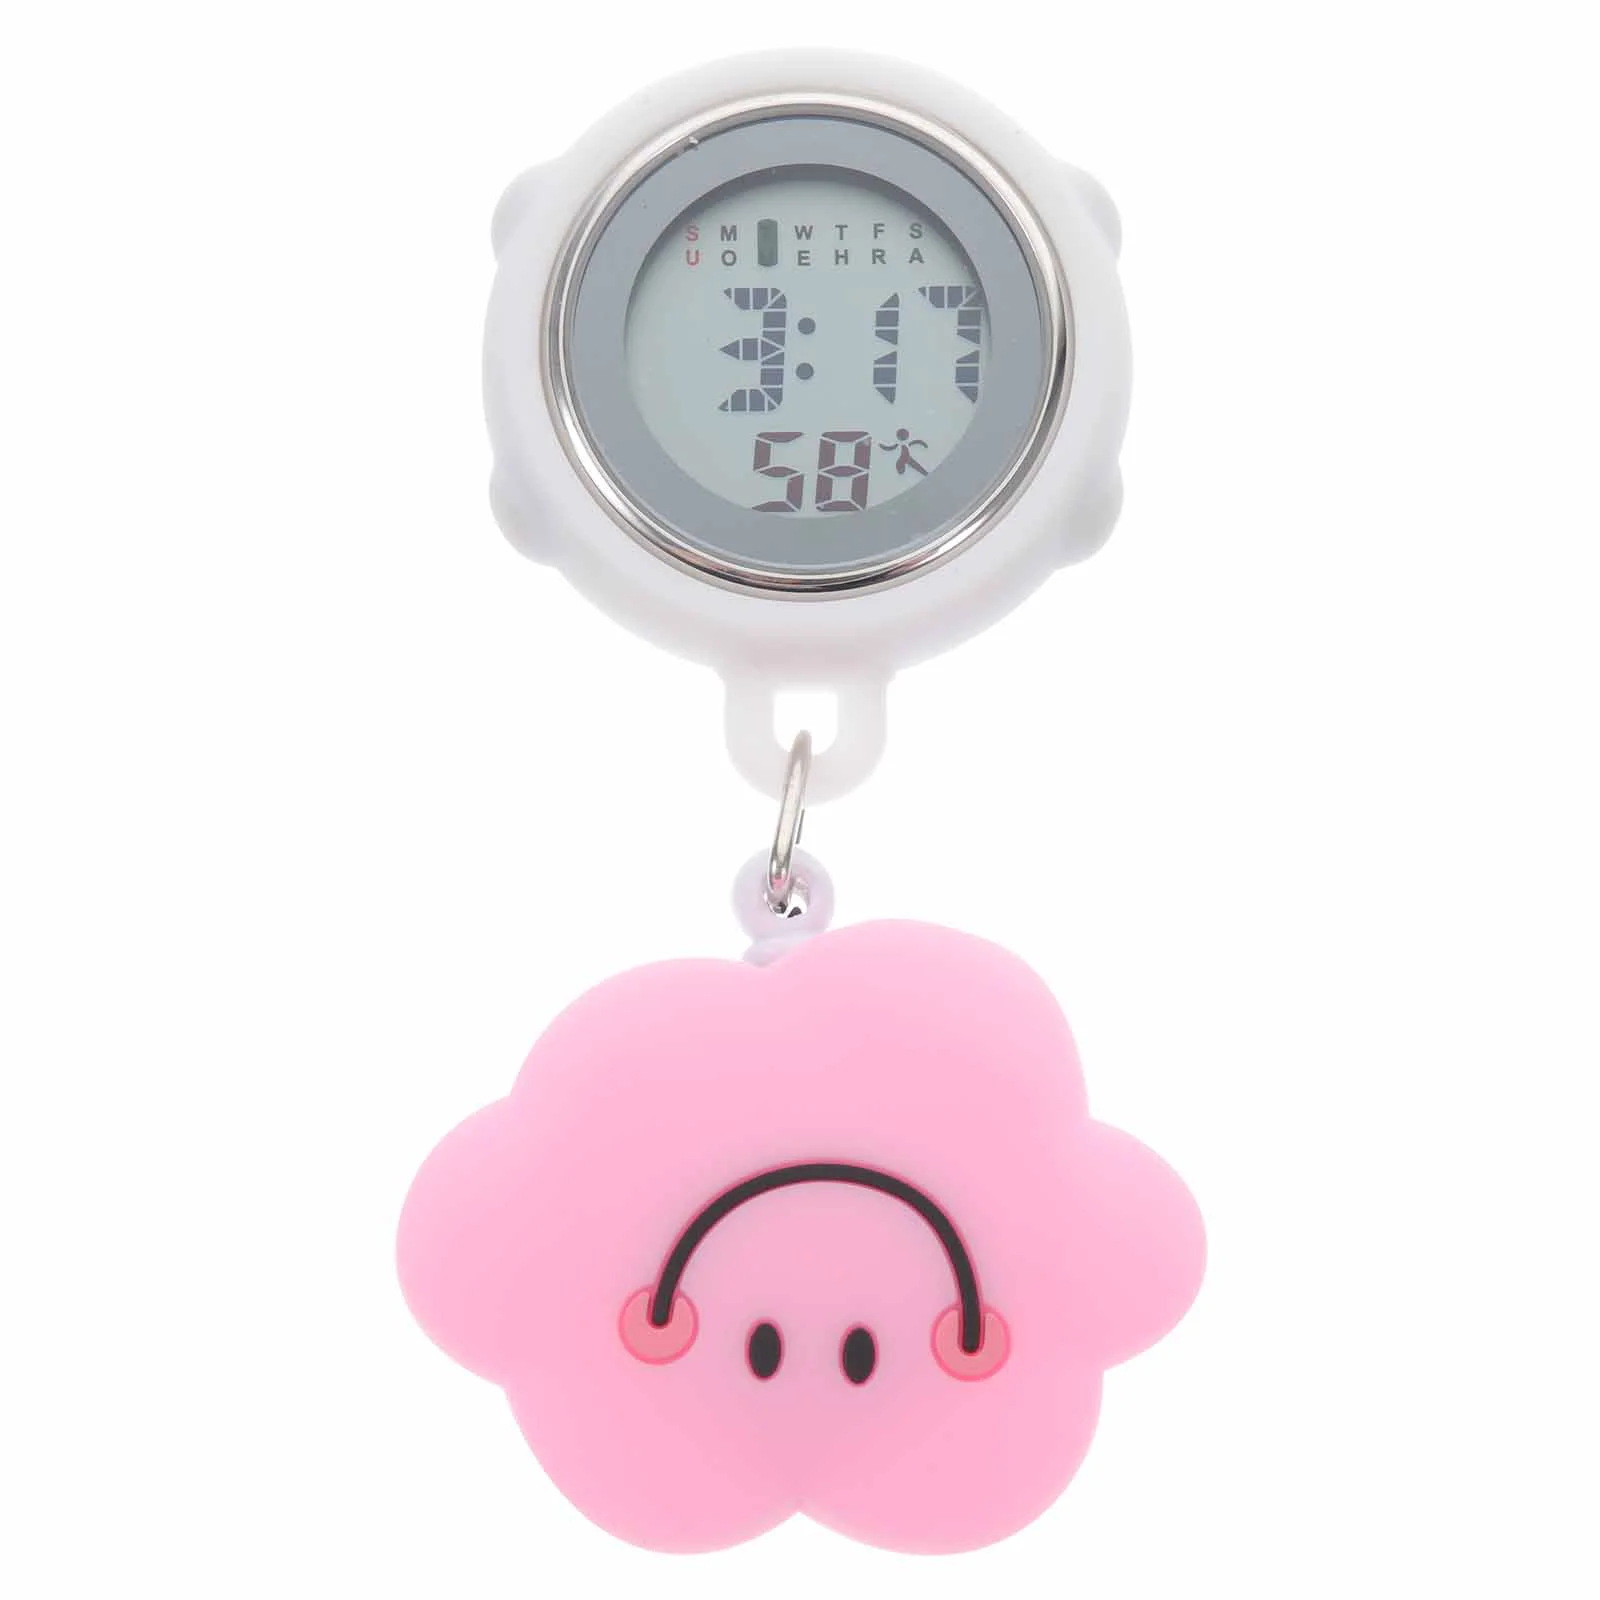 

Ukcoco Retractable Nurse Watches Clip Digital Watches Cute Cartoon Cloud Pattern Smile Round Face Hanging Lapel Pocket Watches